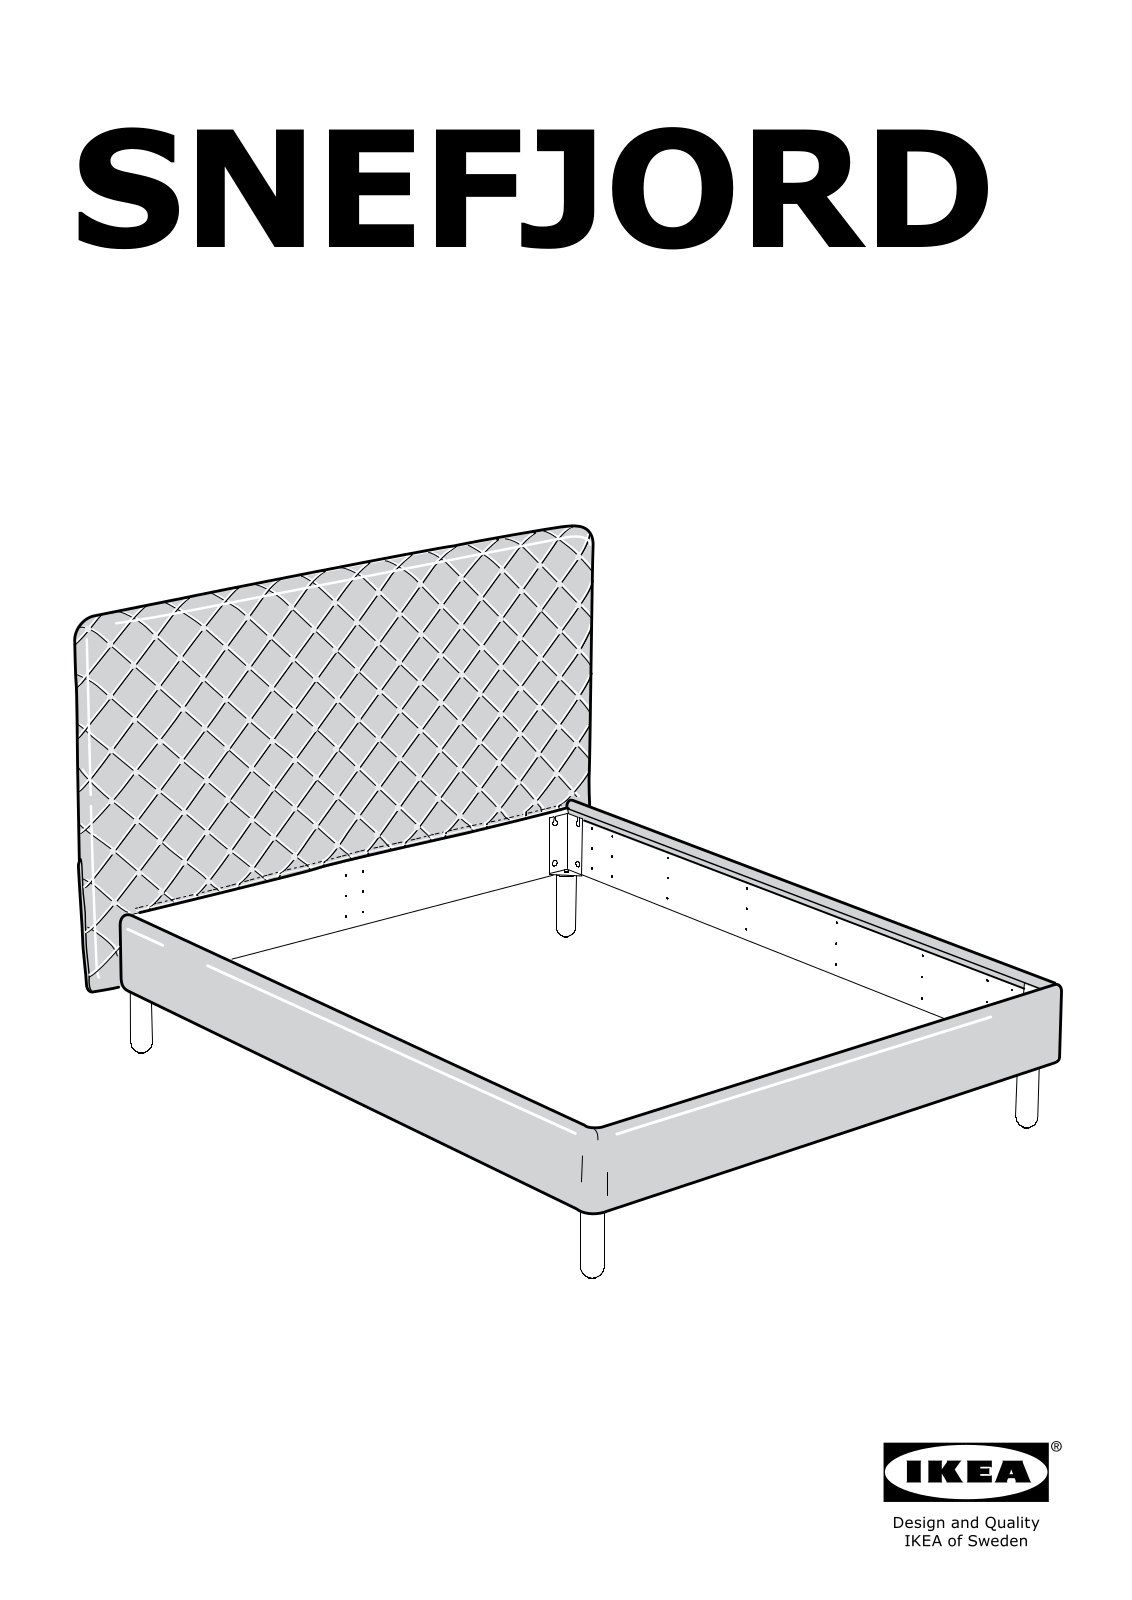 IKEA SNEFJORD Bed frame Assembly Instruction